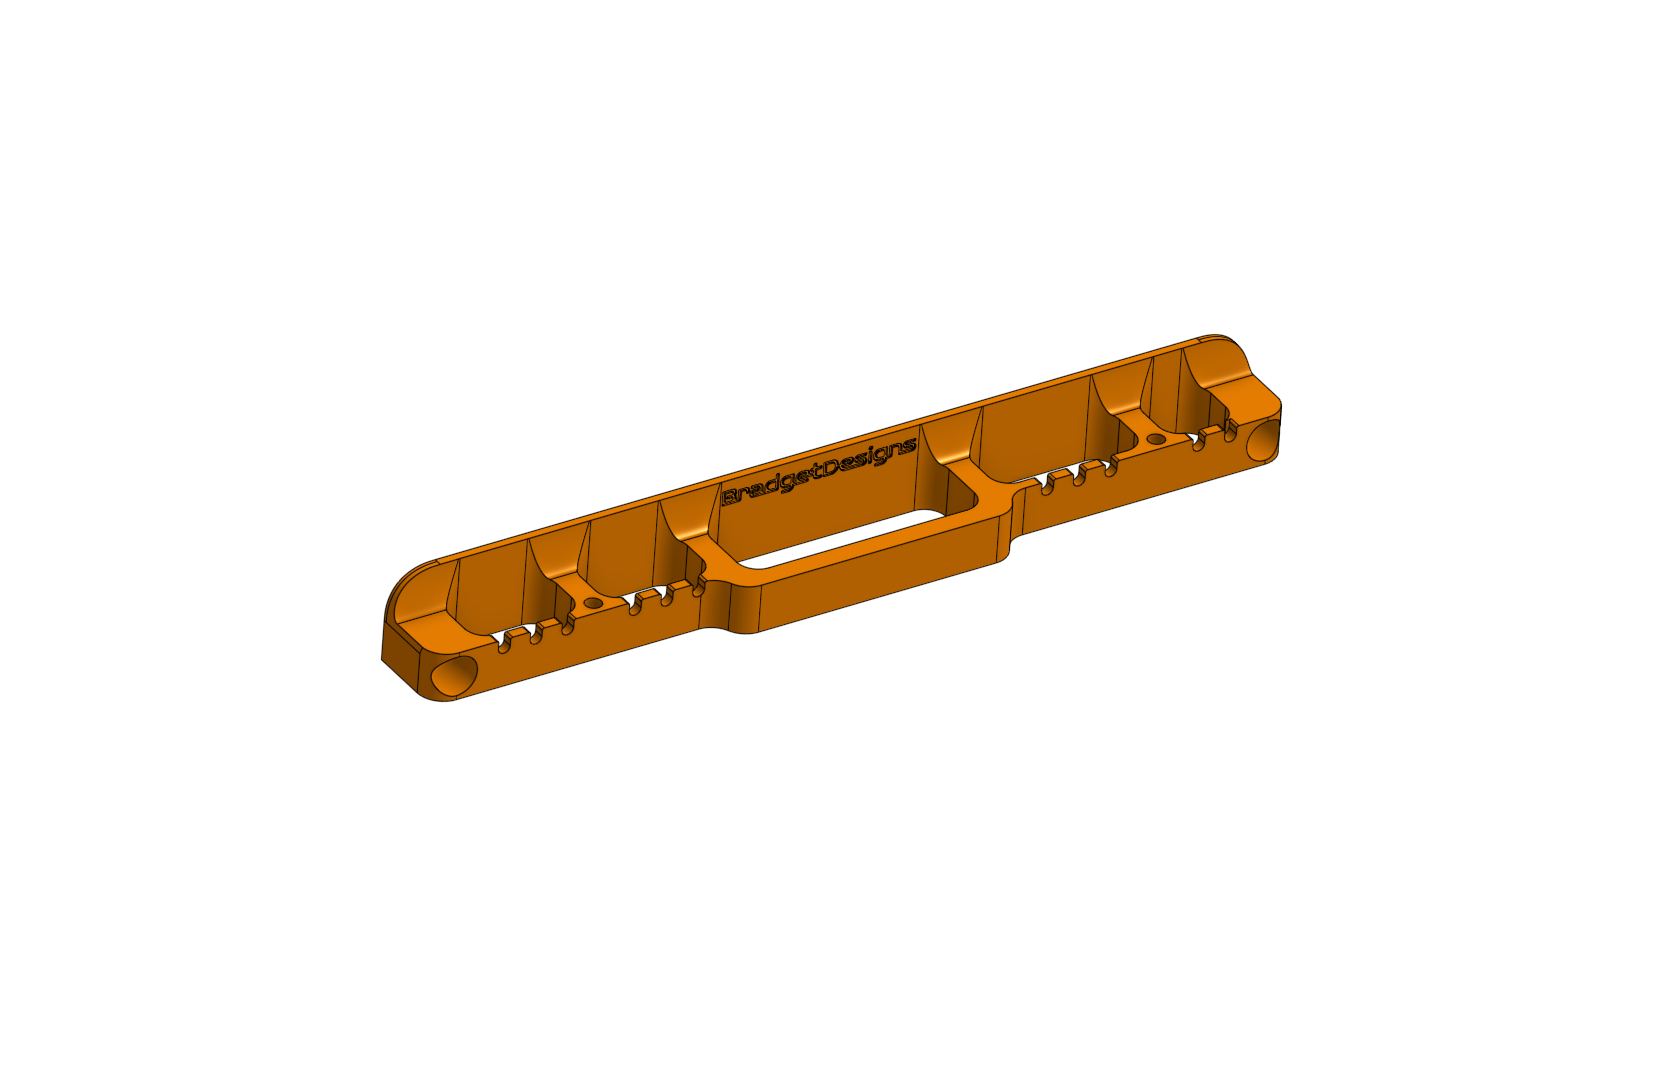 Rendering of the design of the universal tool holder